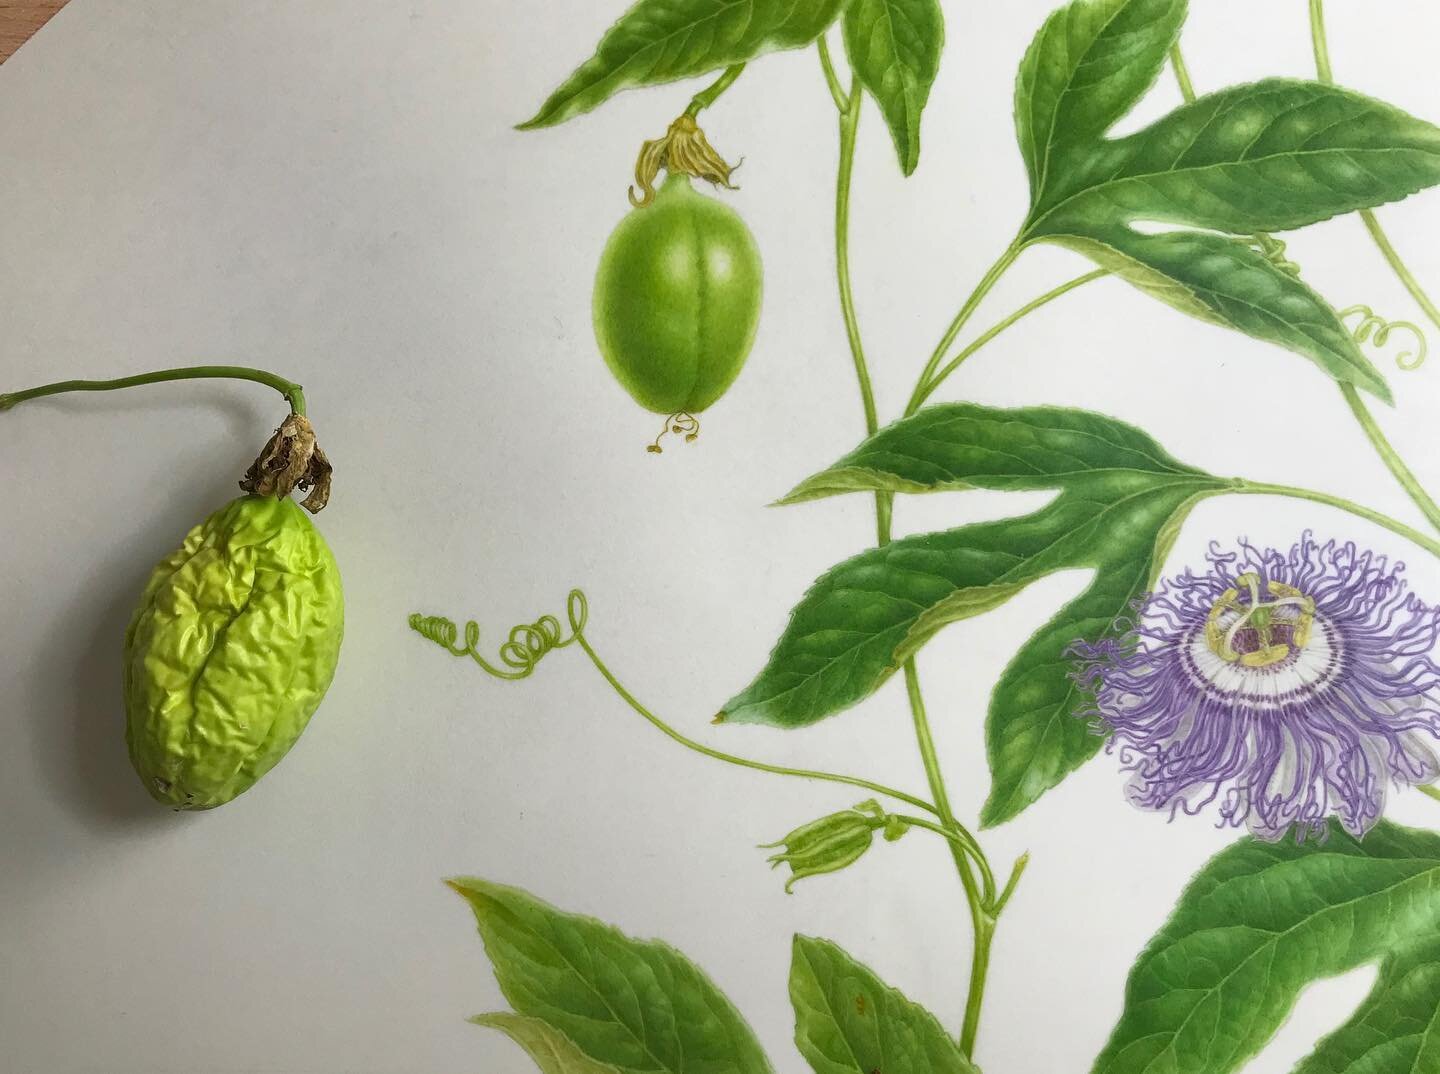 Passionflower progress, slow but steady. The fruit has changed a lot, maybe another subject on its own?  It&rsquo;s very lightweight for a fruit! #passionflower #botanicalpainting #watercolor #artistsoninstagram #painting #botanicalart #nativeplants 